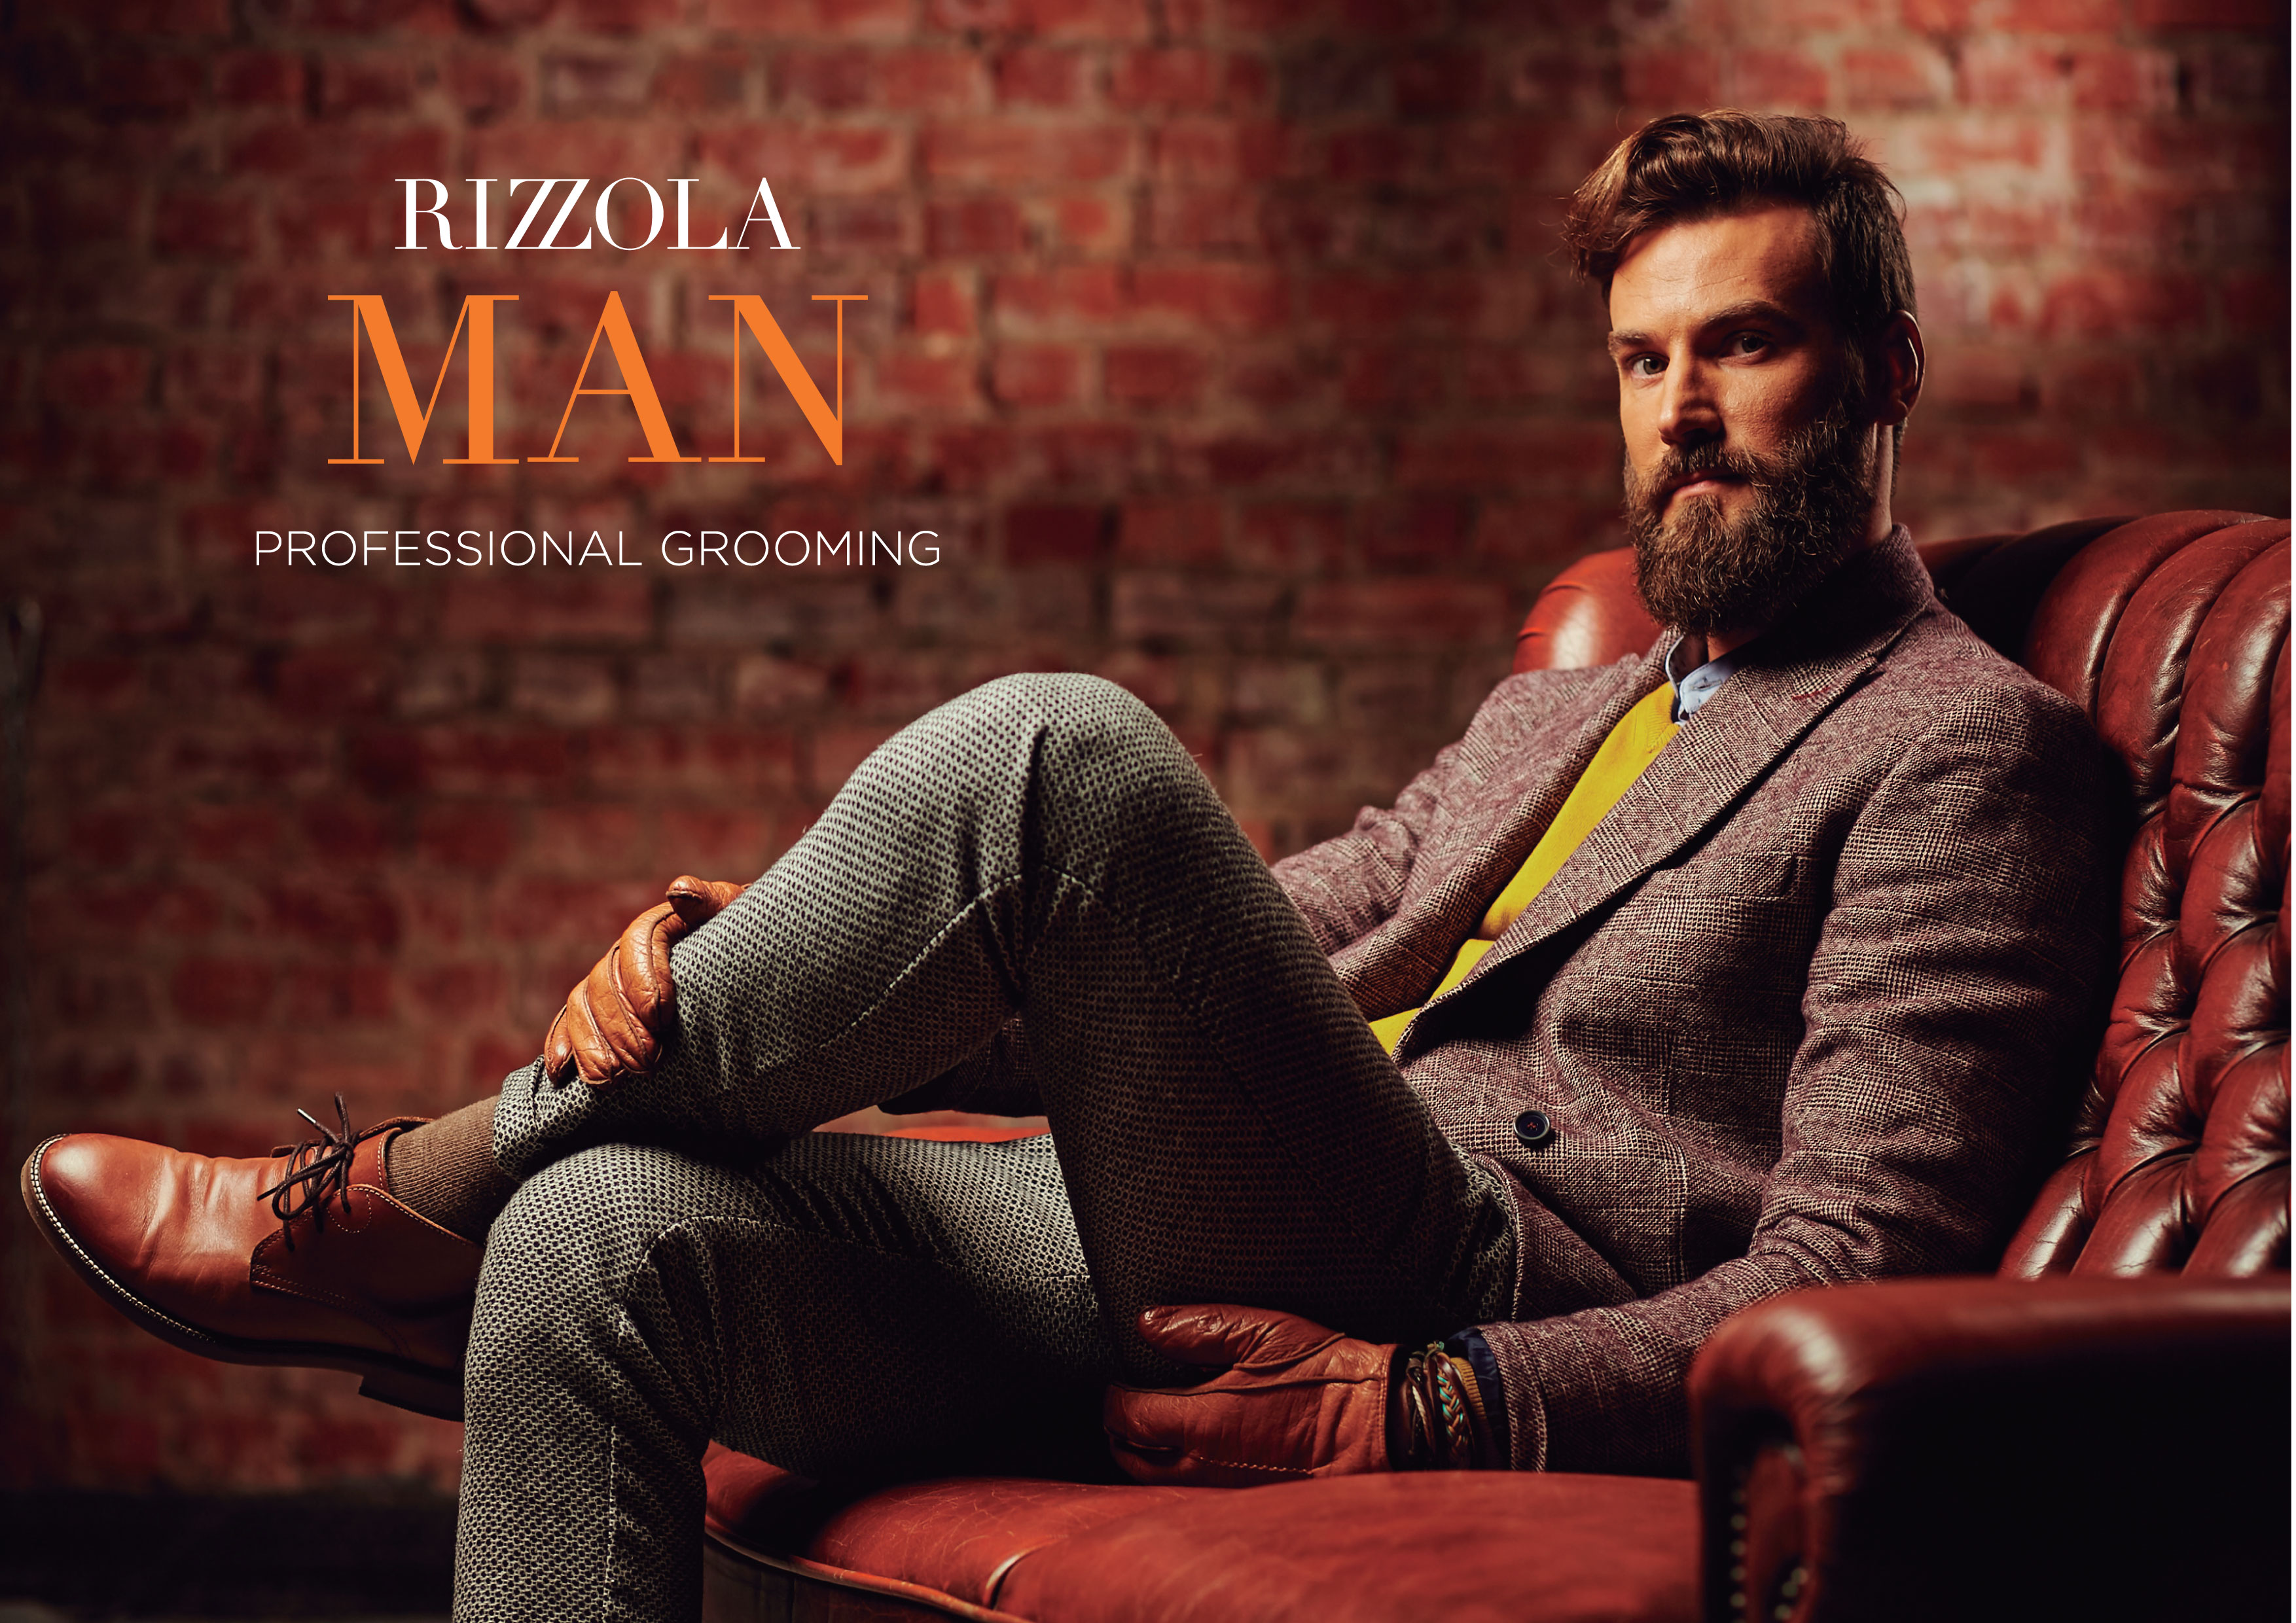 RIZZOLA MAN PROFESSIONAL GROOMING